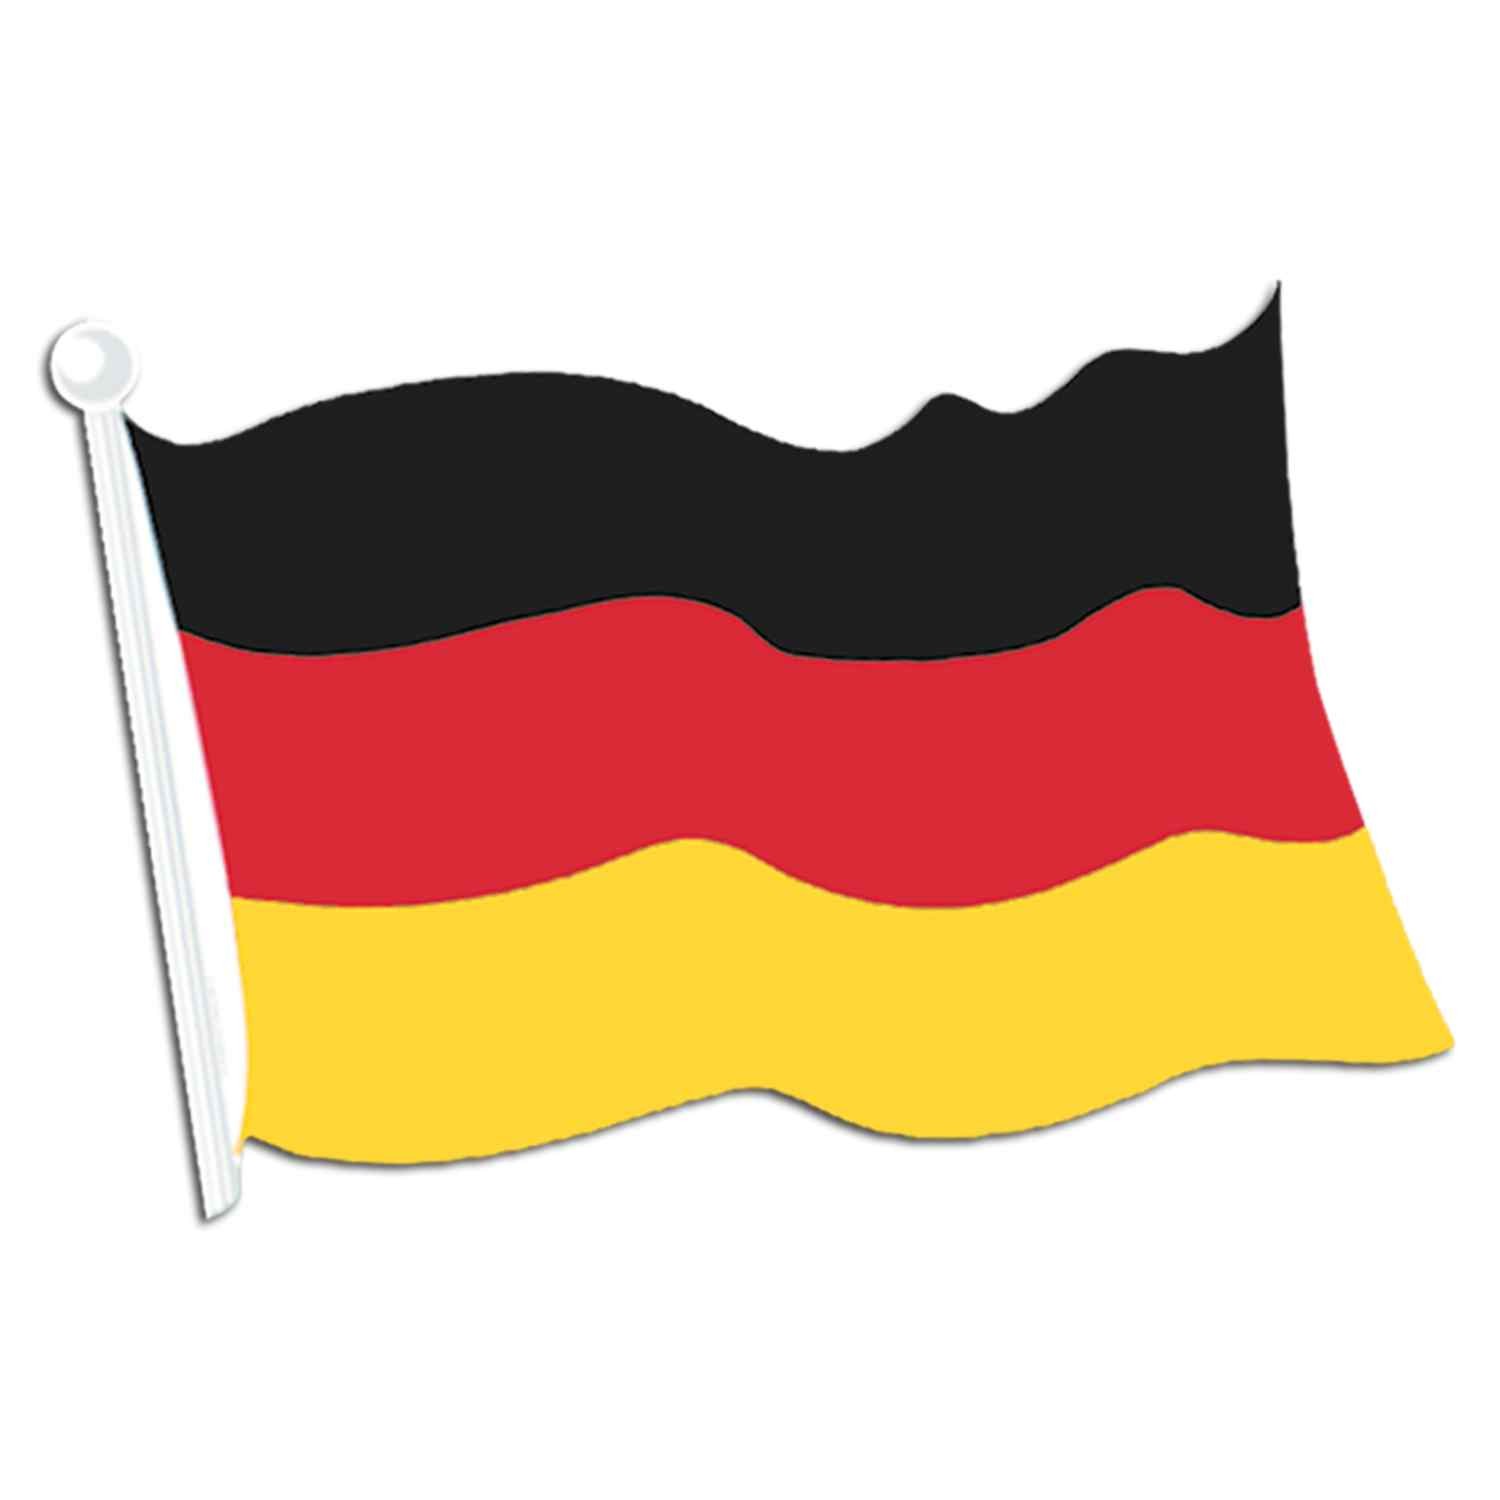 germany clipart flag german